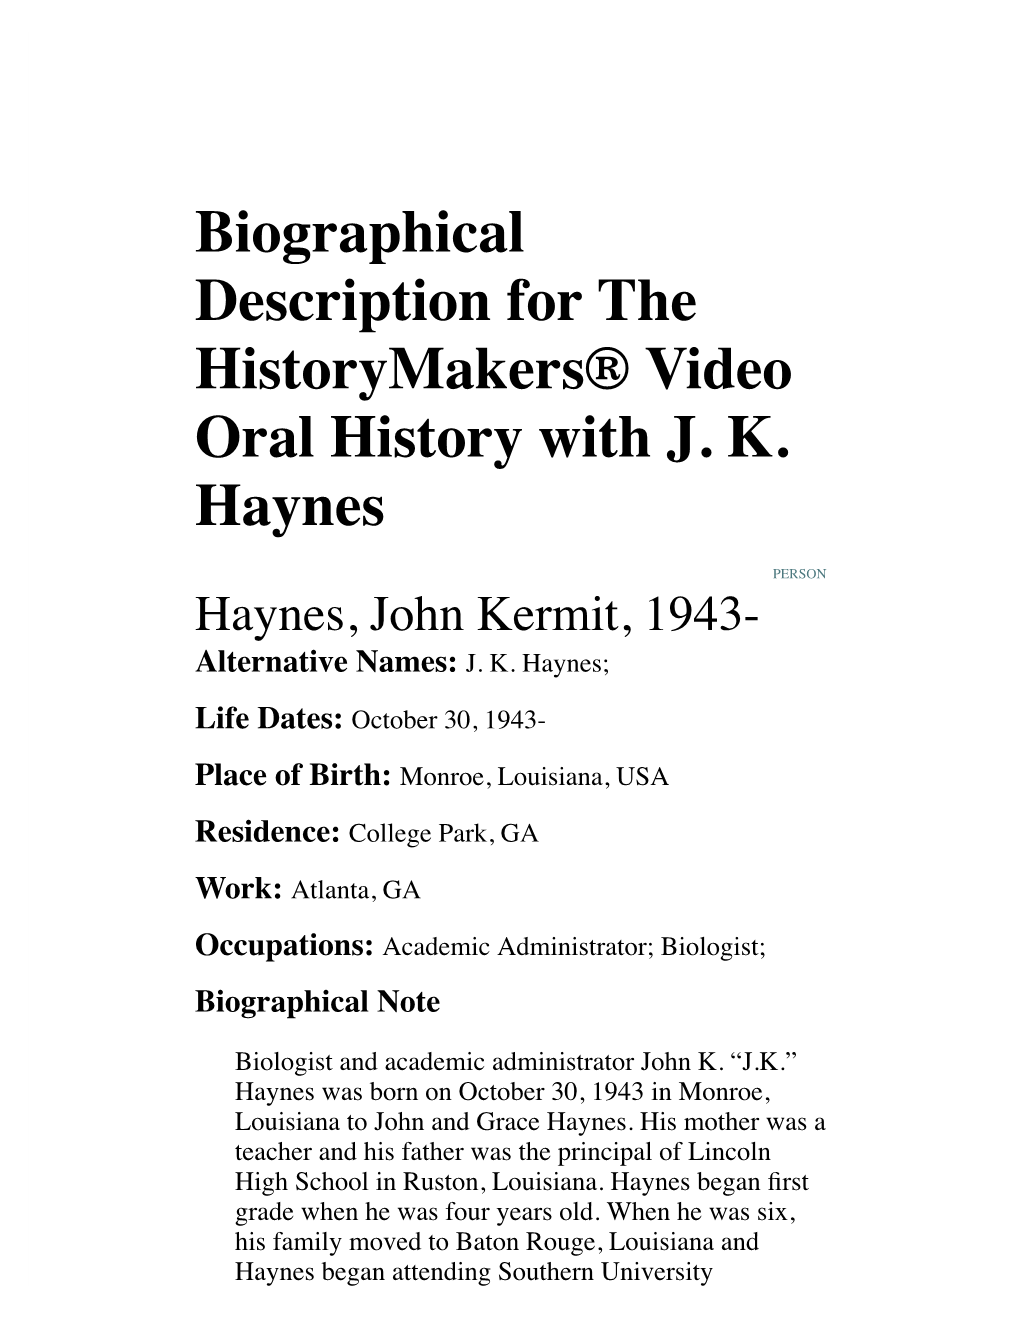 Biographical Description for the Historymakers® Video Oral History with J